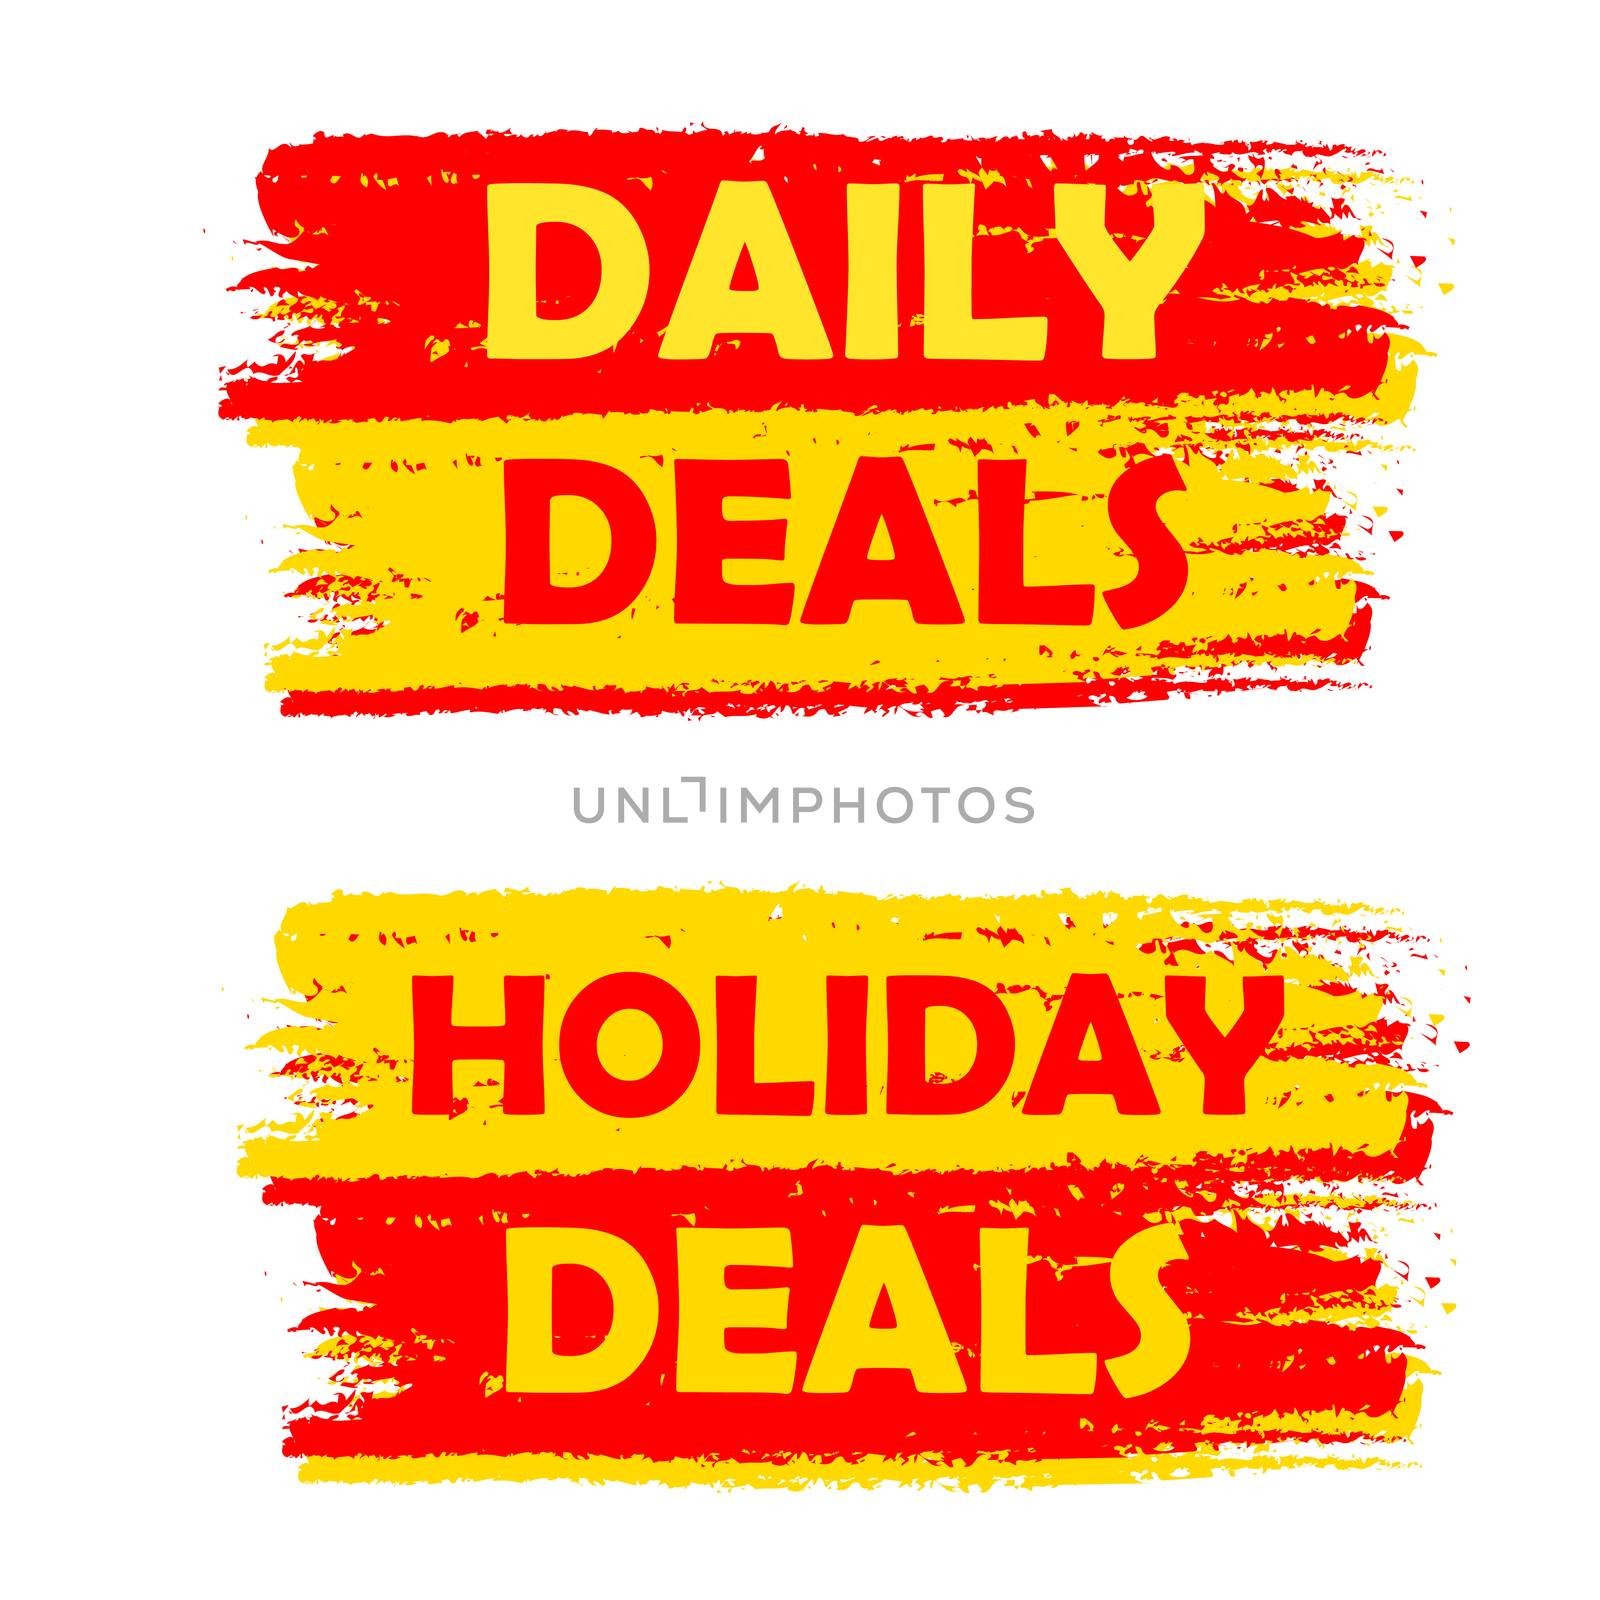 daily and holiday deals banners - text in yellow and red drawn labels, business commerce shopping concept